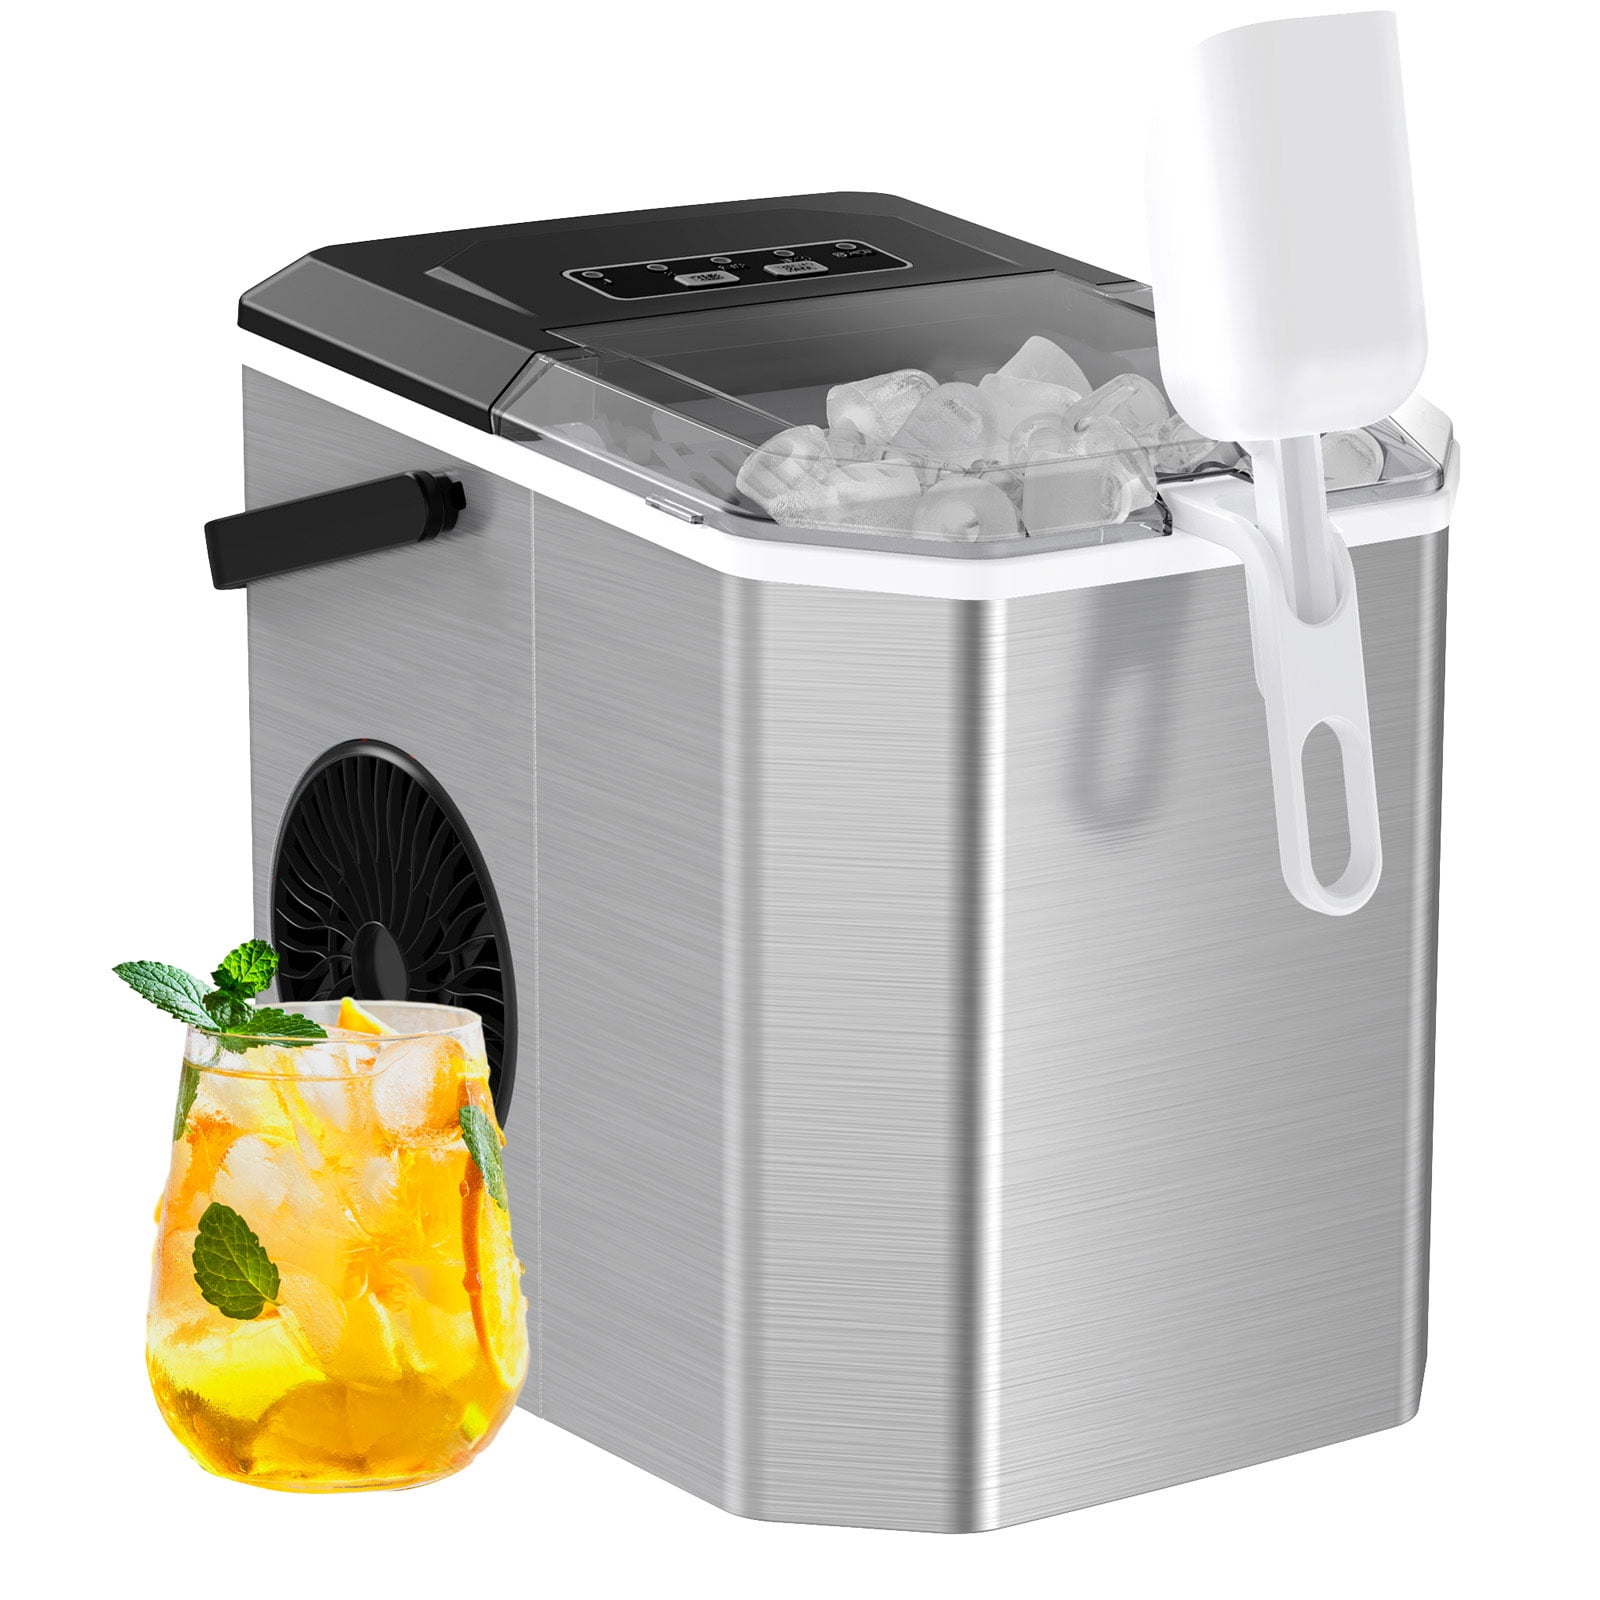 $99.99 - Kismile Countertop Self-Cleaning Compact Portable Ice Cube Maker -  White – Môdern Space Gallery